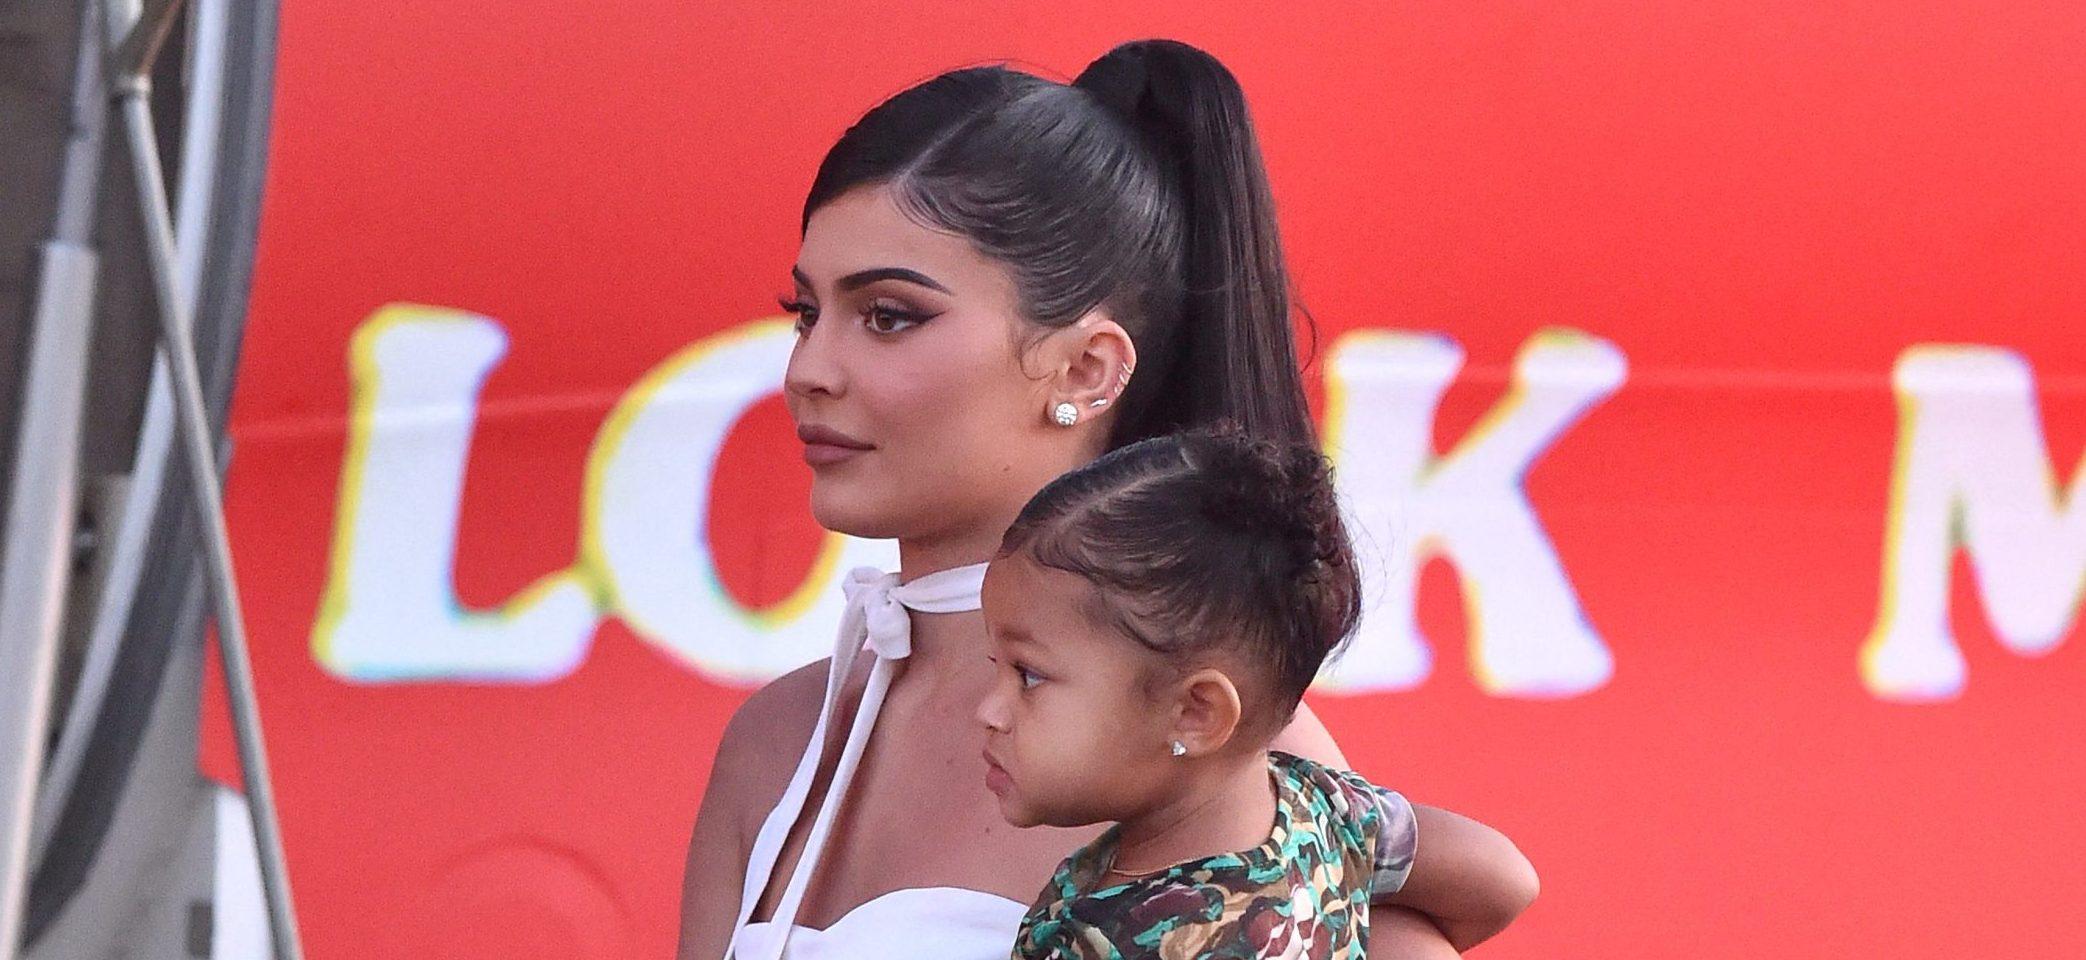 Kylie Jenner and Stormi Webster arriving to the Netflix' Premiere 'Travis Scott: Look Mom I Can Fly'